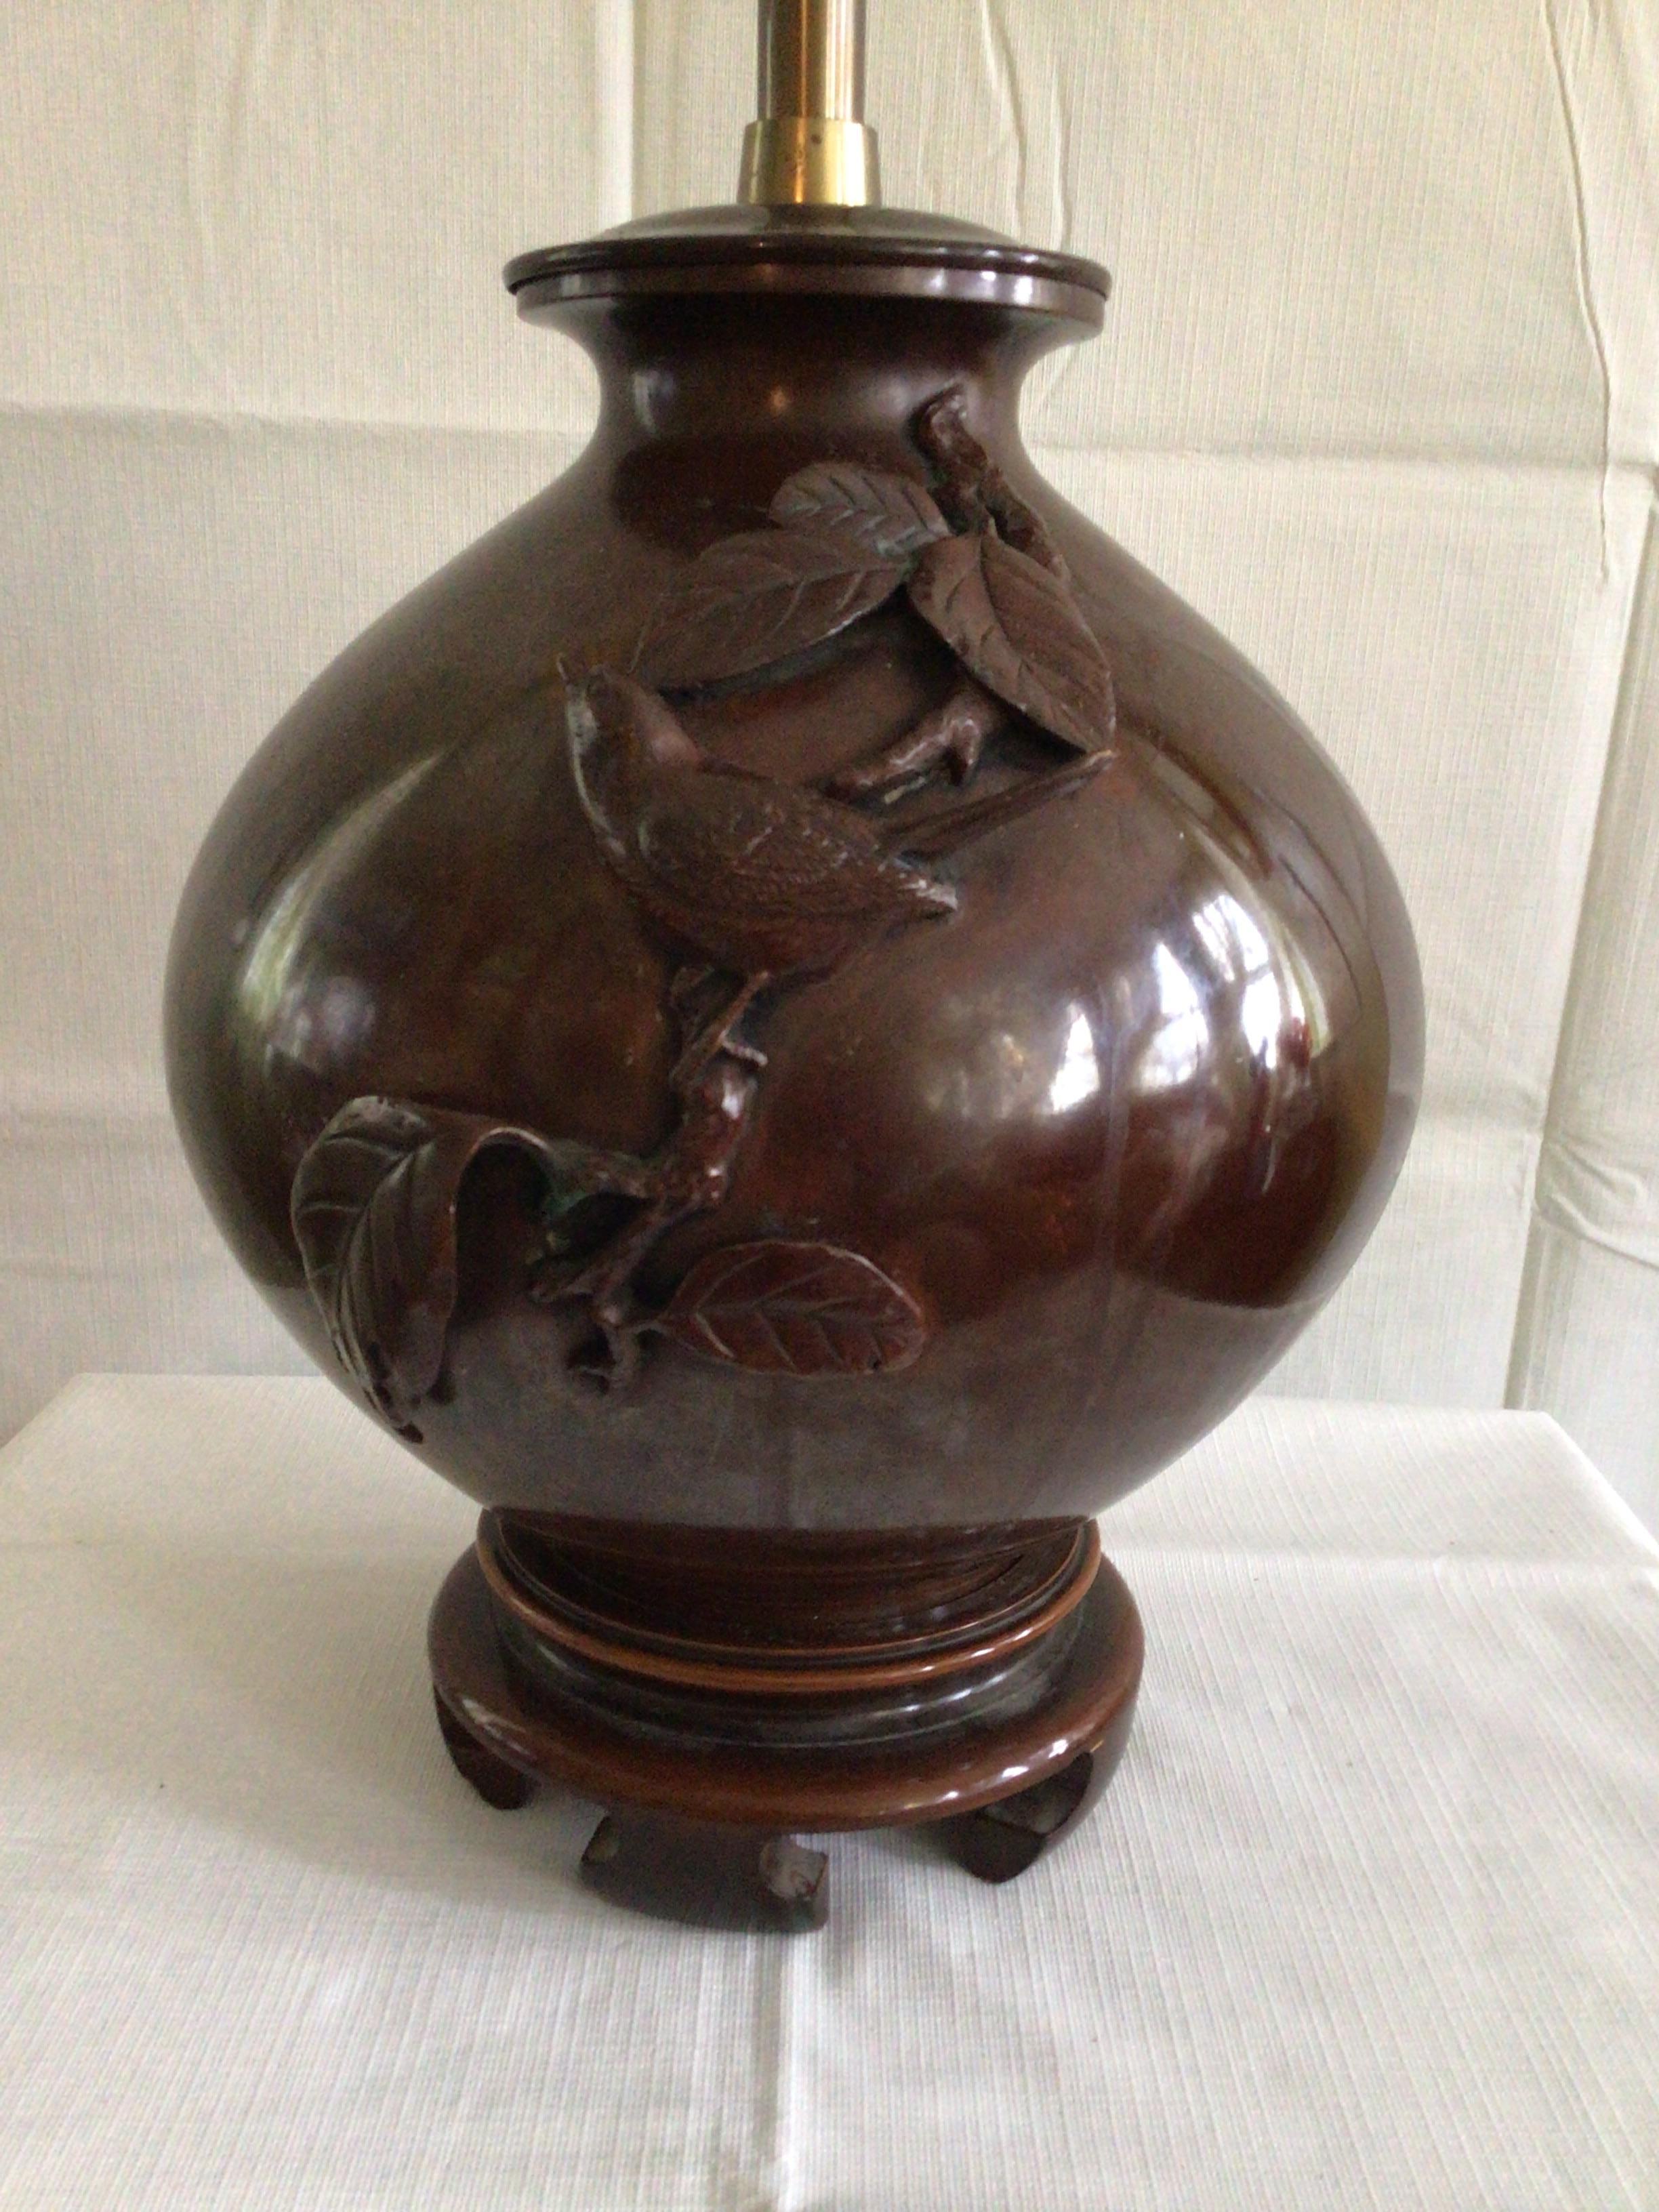 1940s bronze table lamp with bird on Asian style wood base.